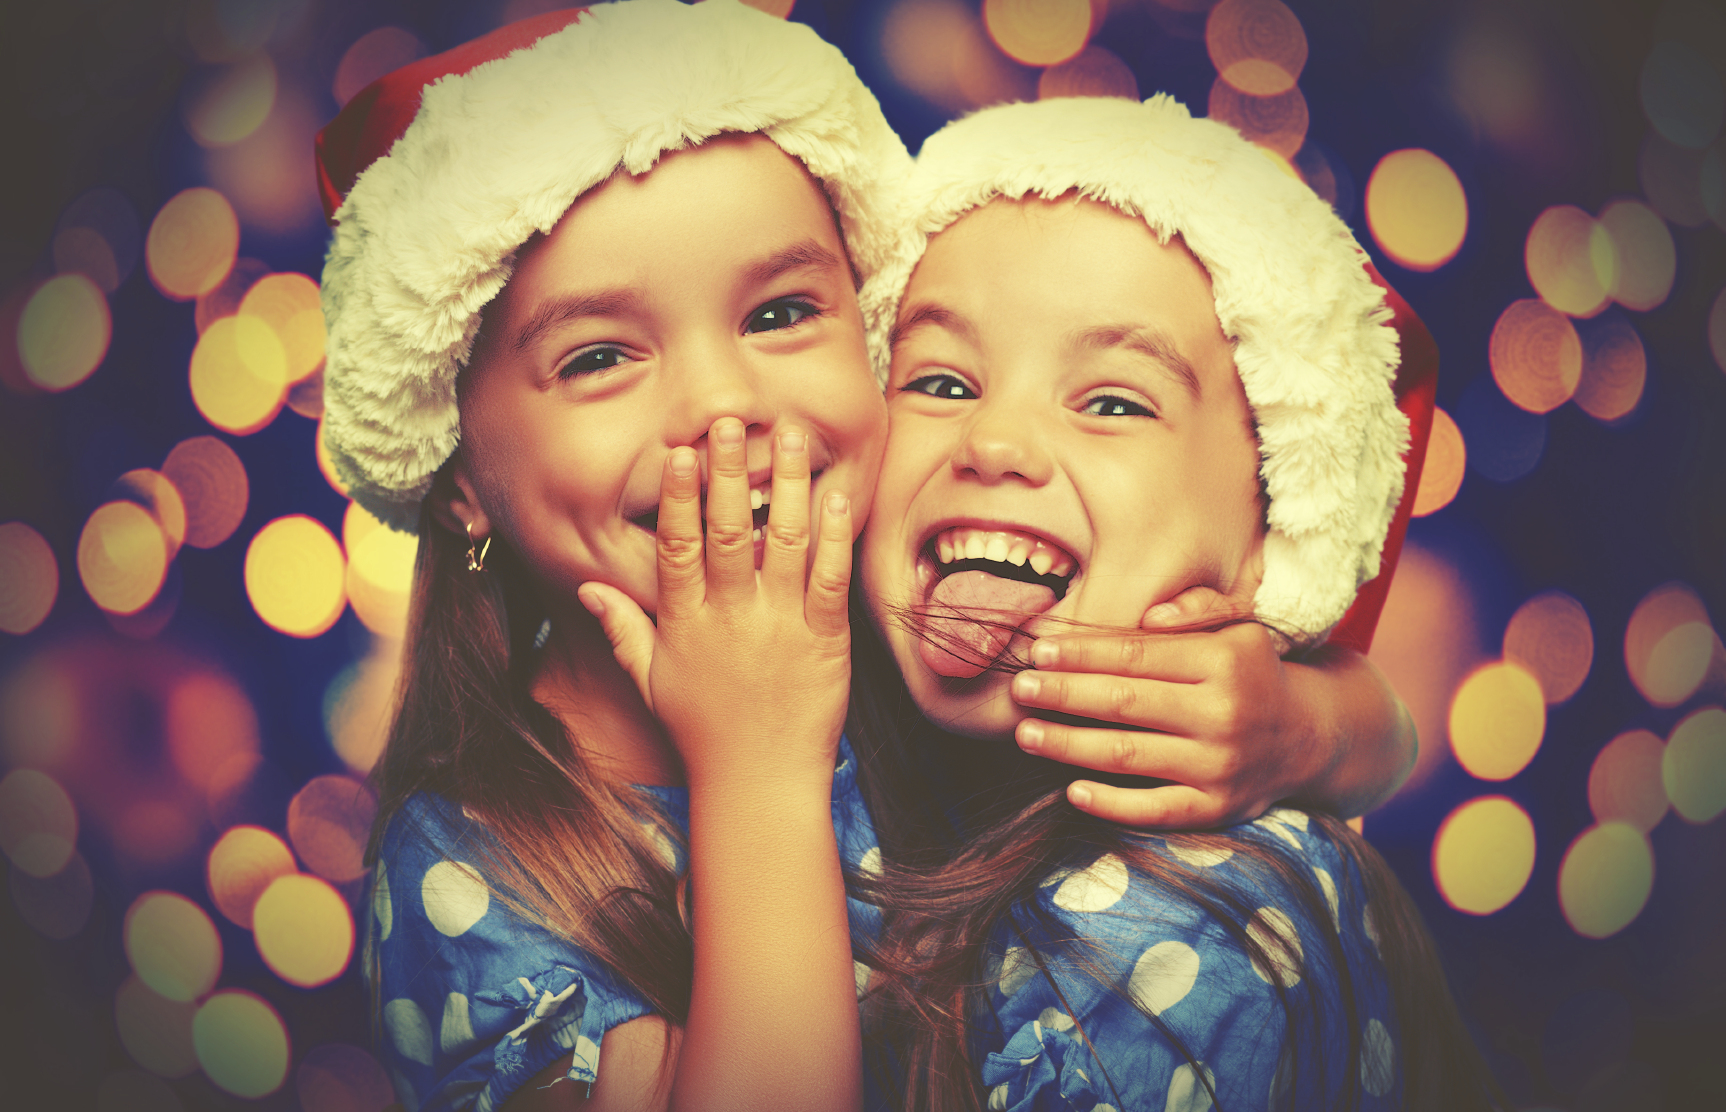 5 Tips For Less Stress & More Joy During The Holiday Season